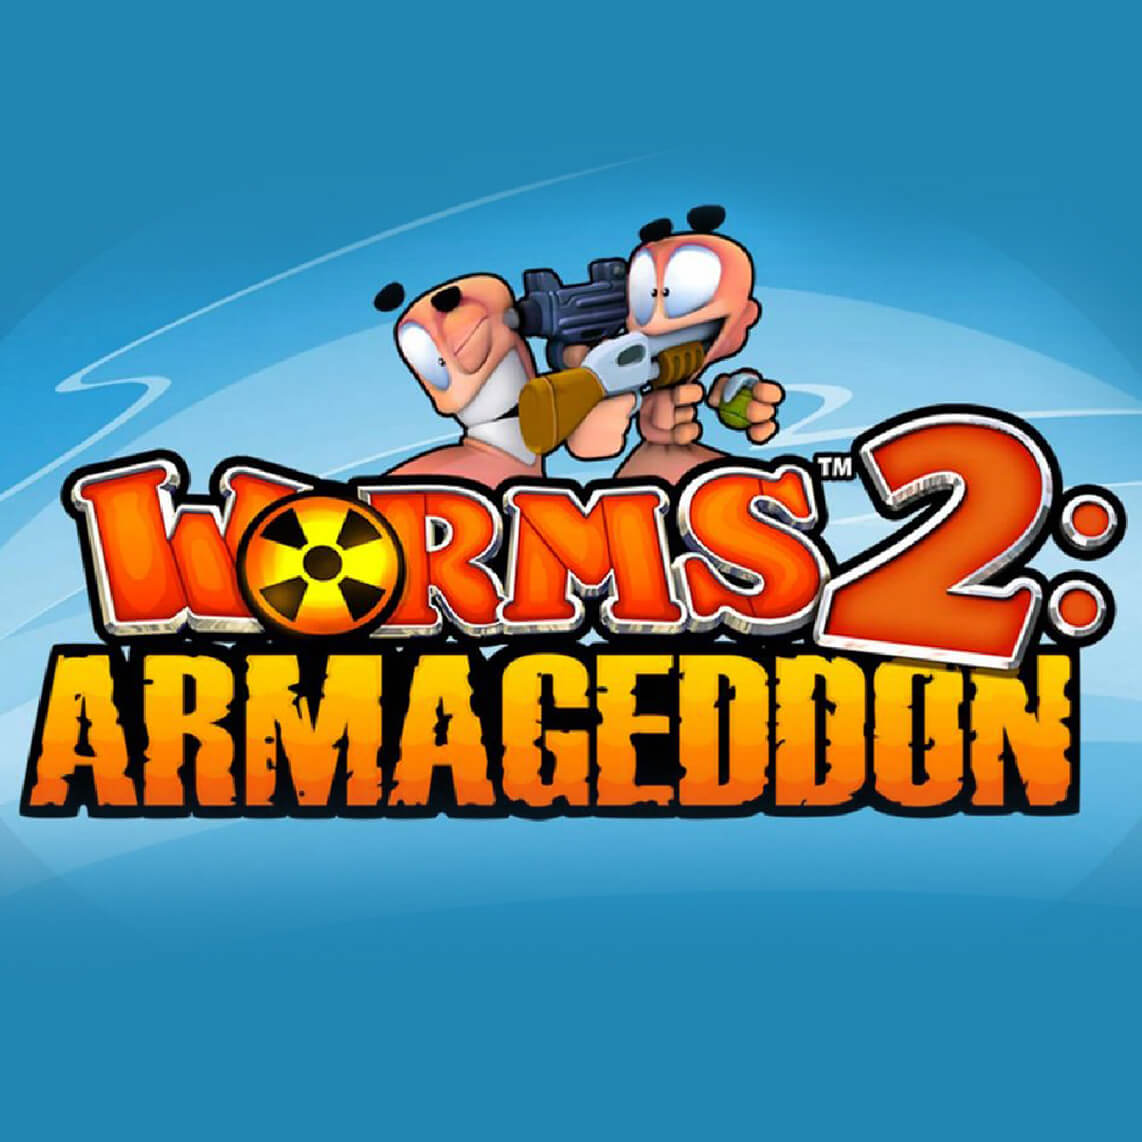 Worms 2 Armageddon | Worms 2 Game | Team17